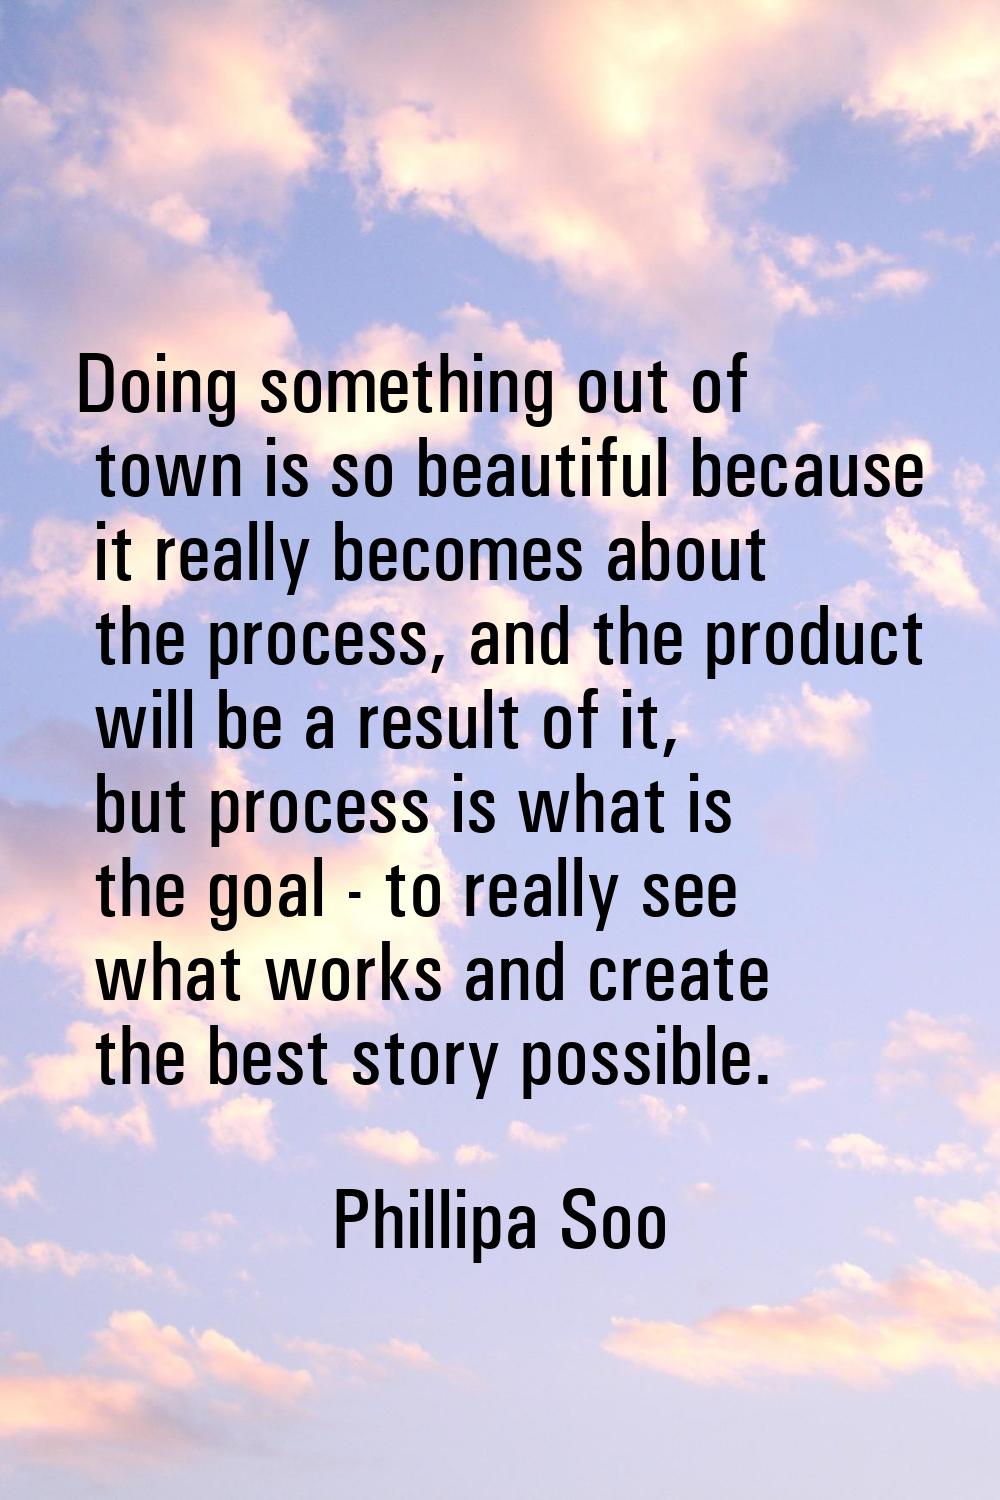 Doing something out of town is so beautiful because it really becomes about the process, and the pr